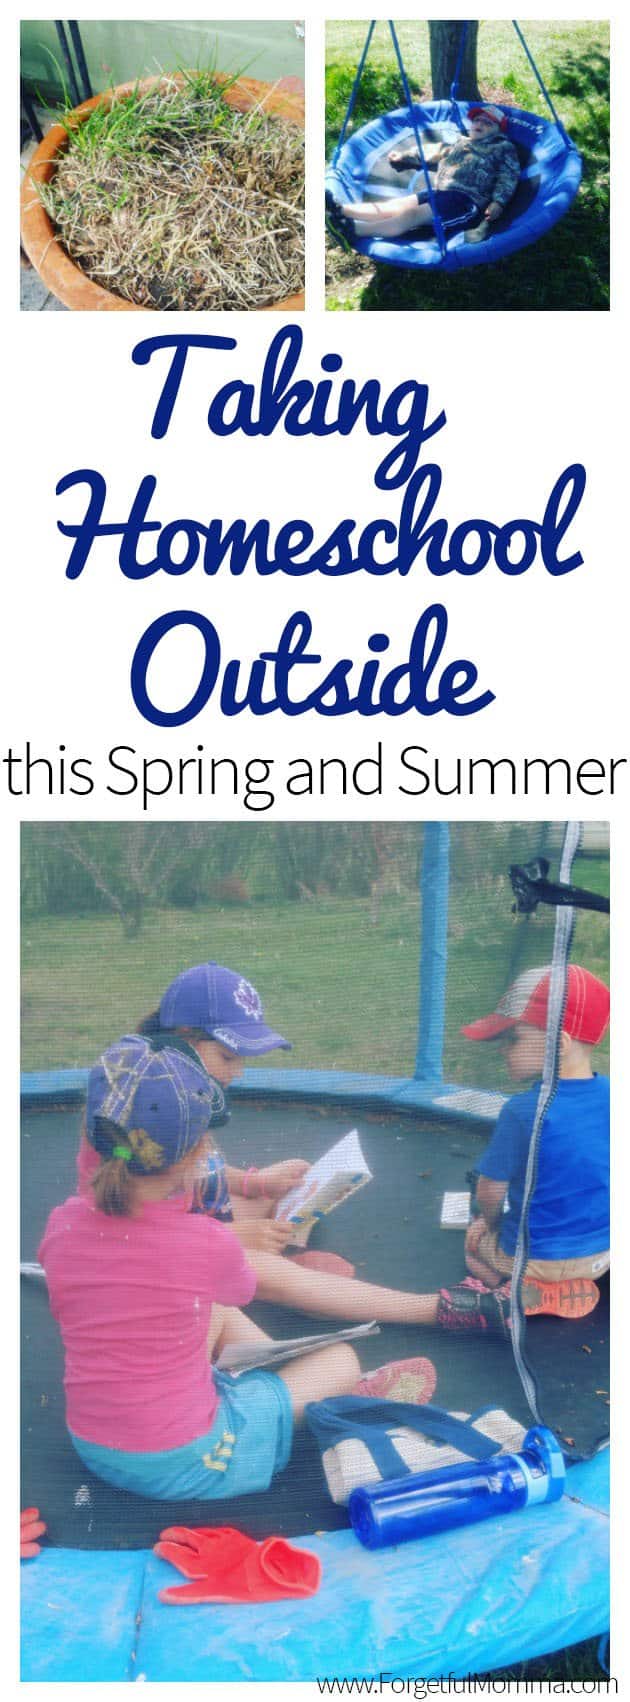 Taking Homeschool Outside this Spring and Summer